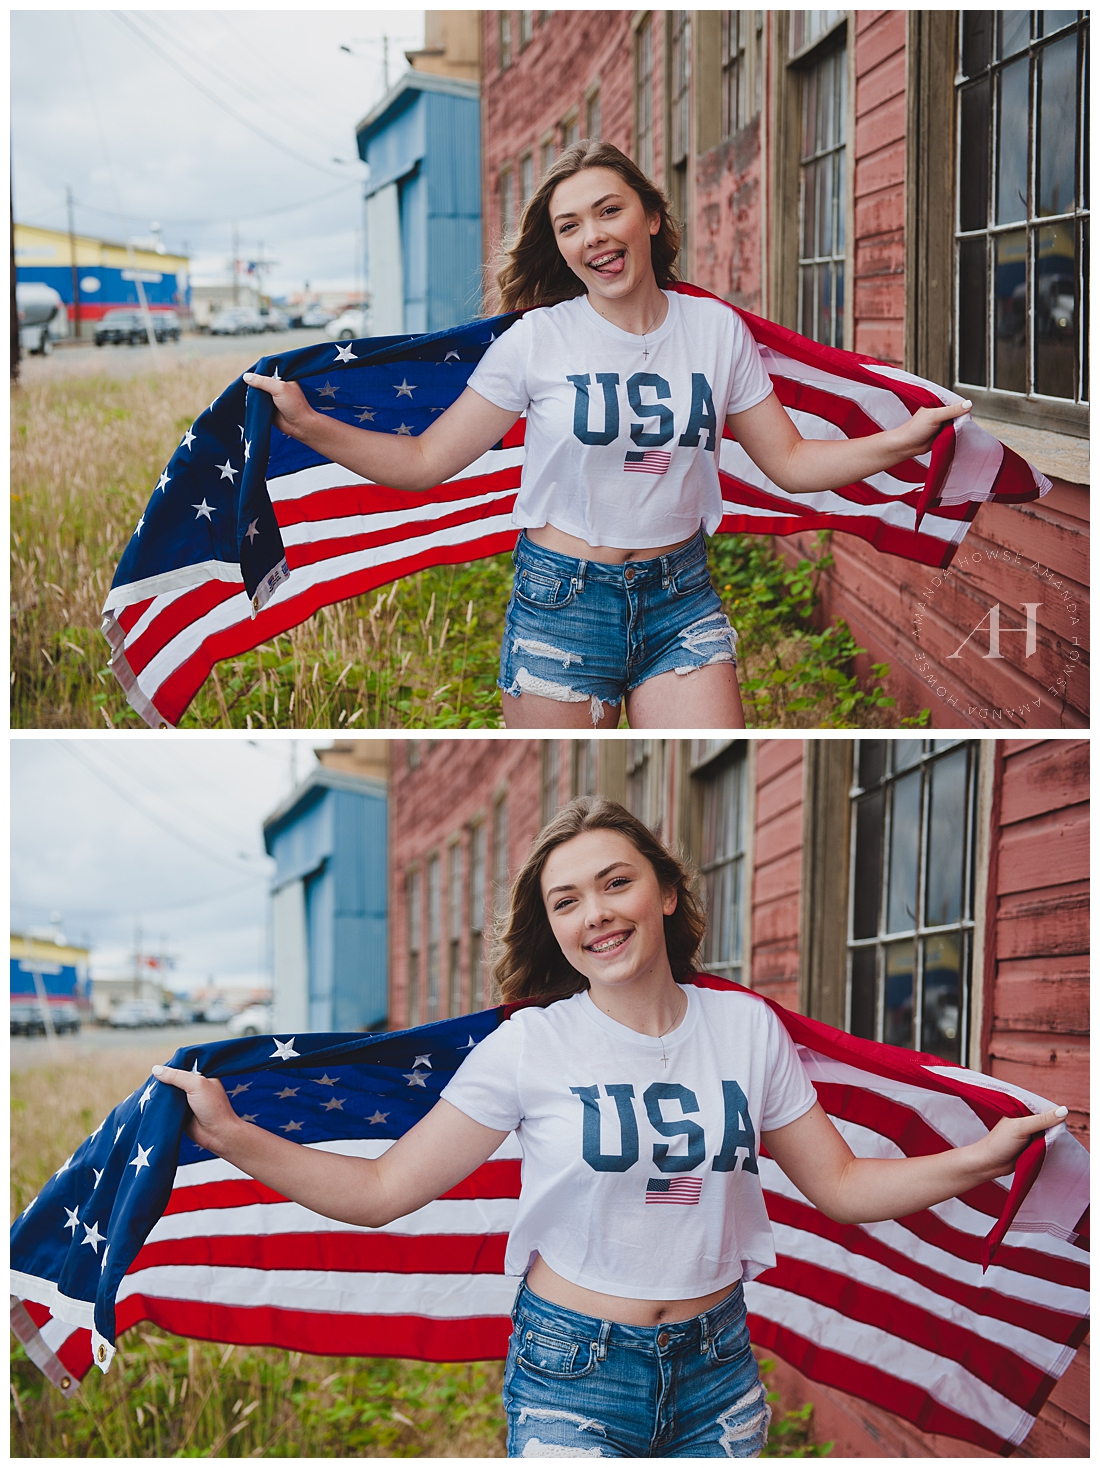 High School Senior Girl with USA T-Shirt and American Flag for July 4th Photoshoot | Photographed by Tacoma Senior Photographer Amanda Howse